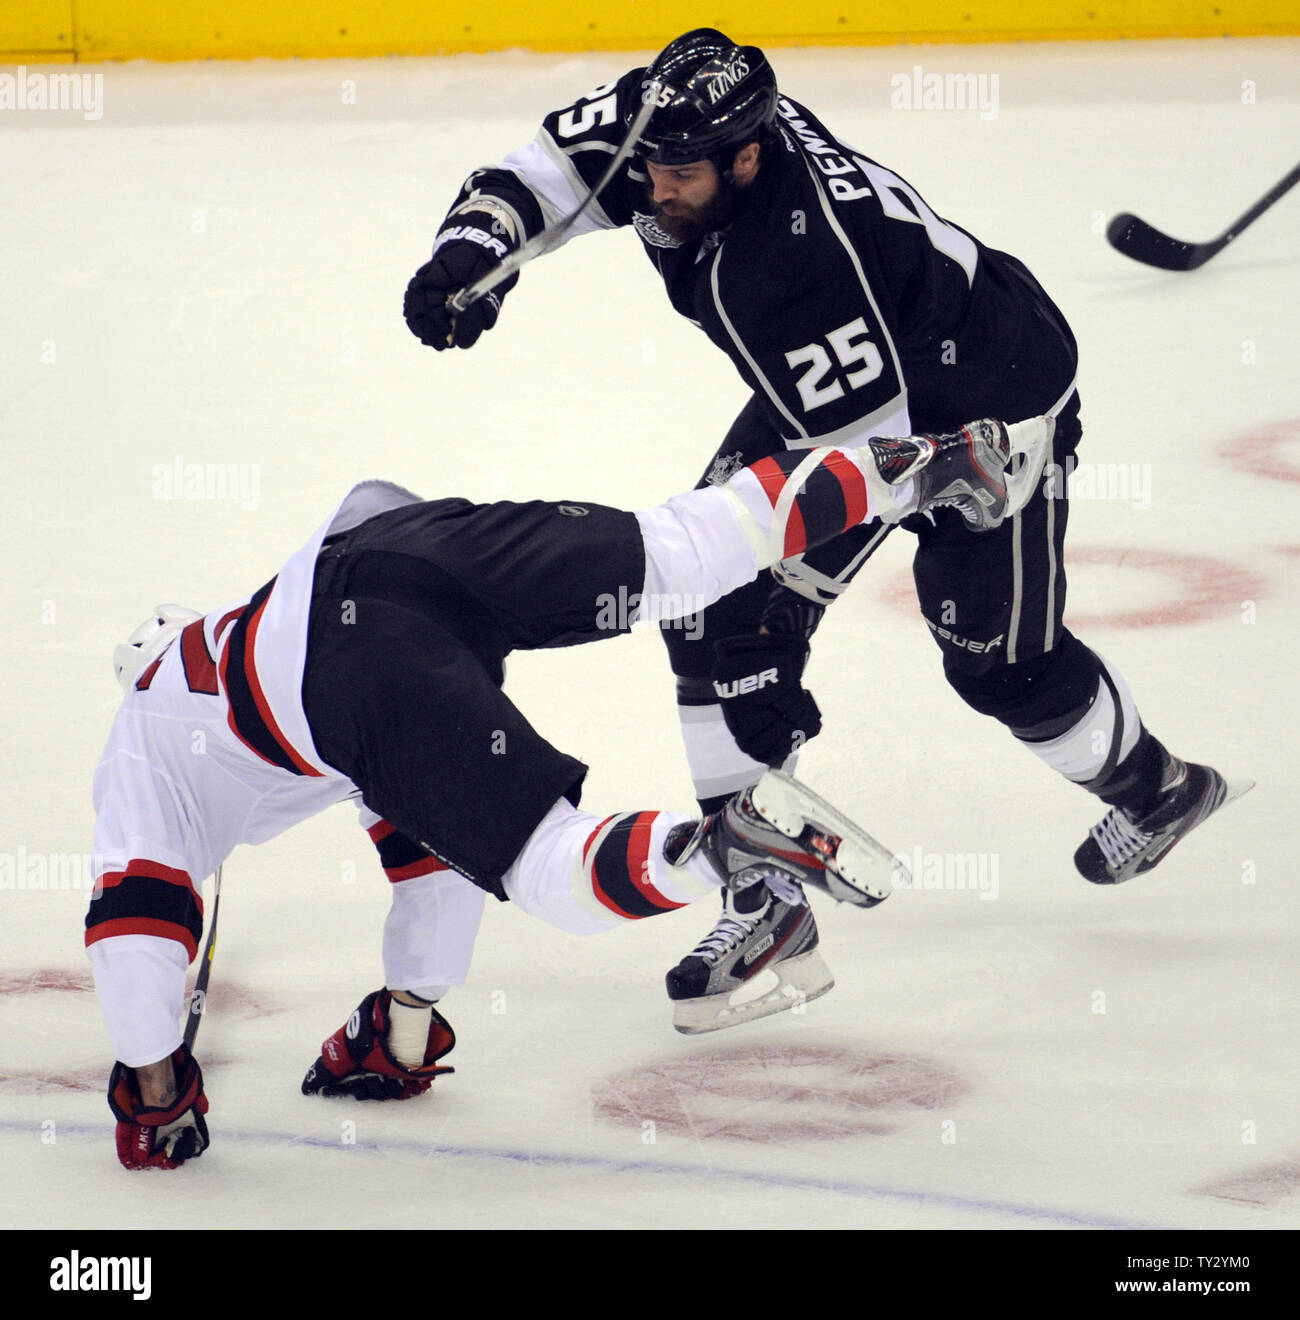 Los Angeles Kings at New Jersey Devils